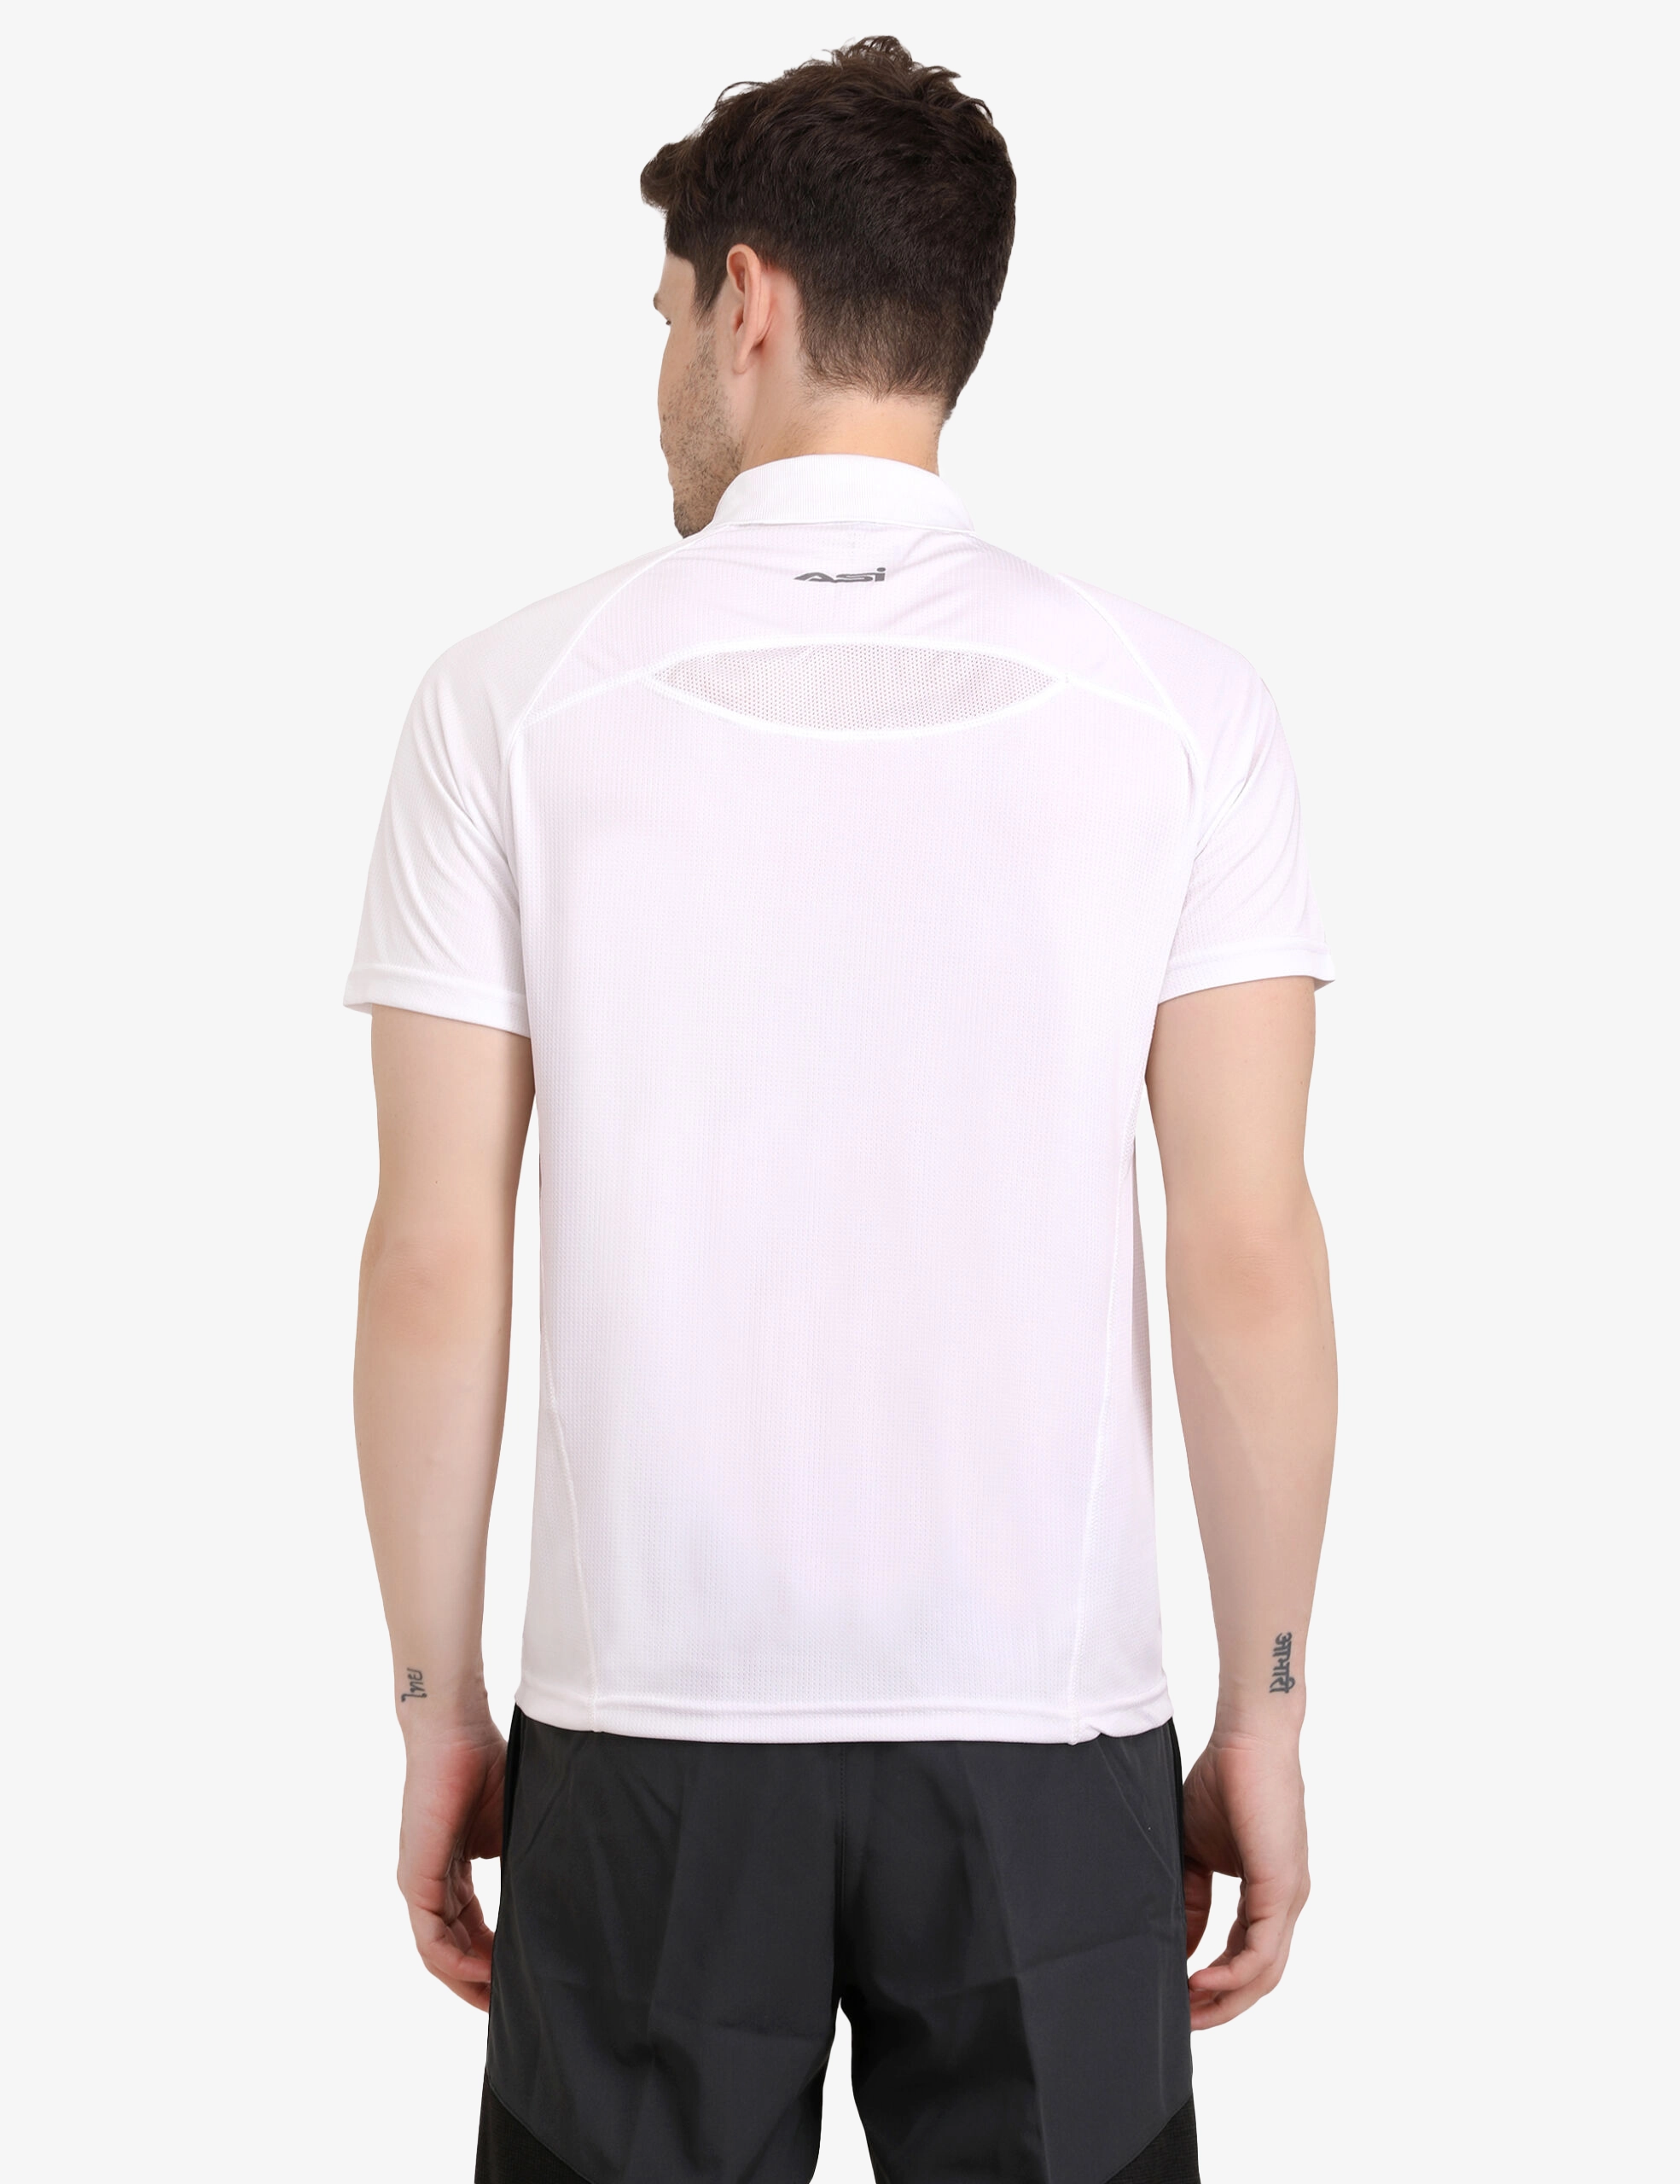 ASI Flick T-Shirt White Color